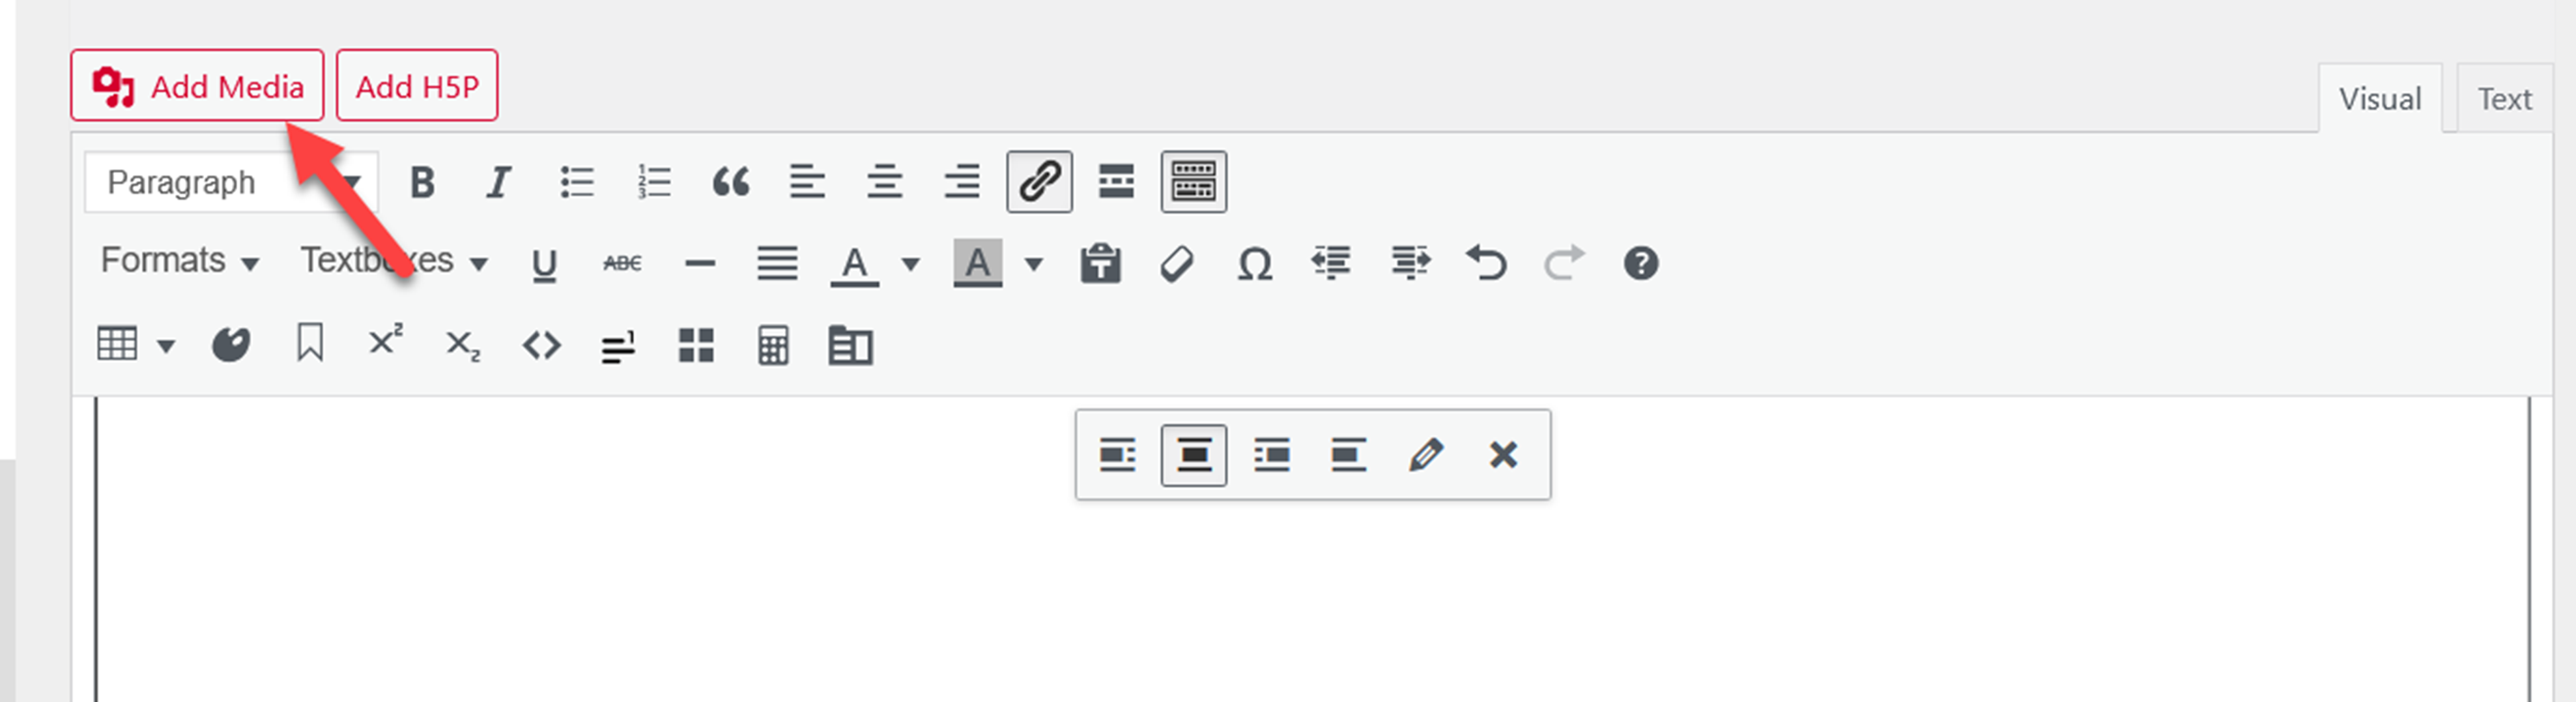 This image shows the Add media button above the text editor